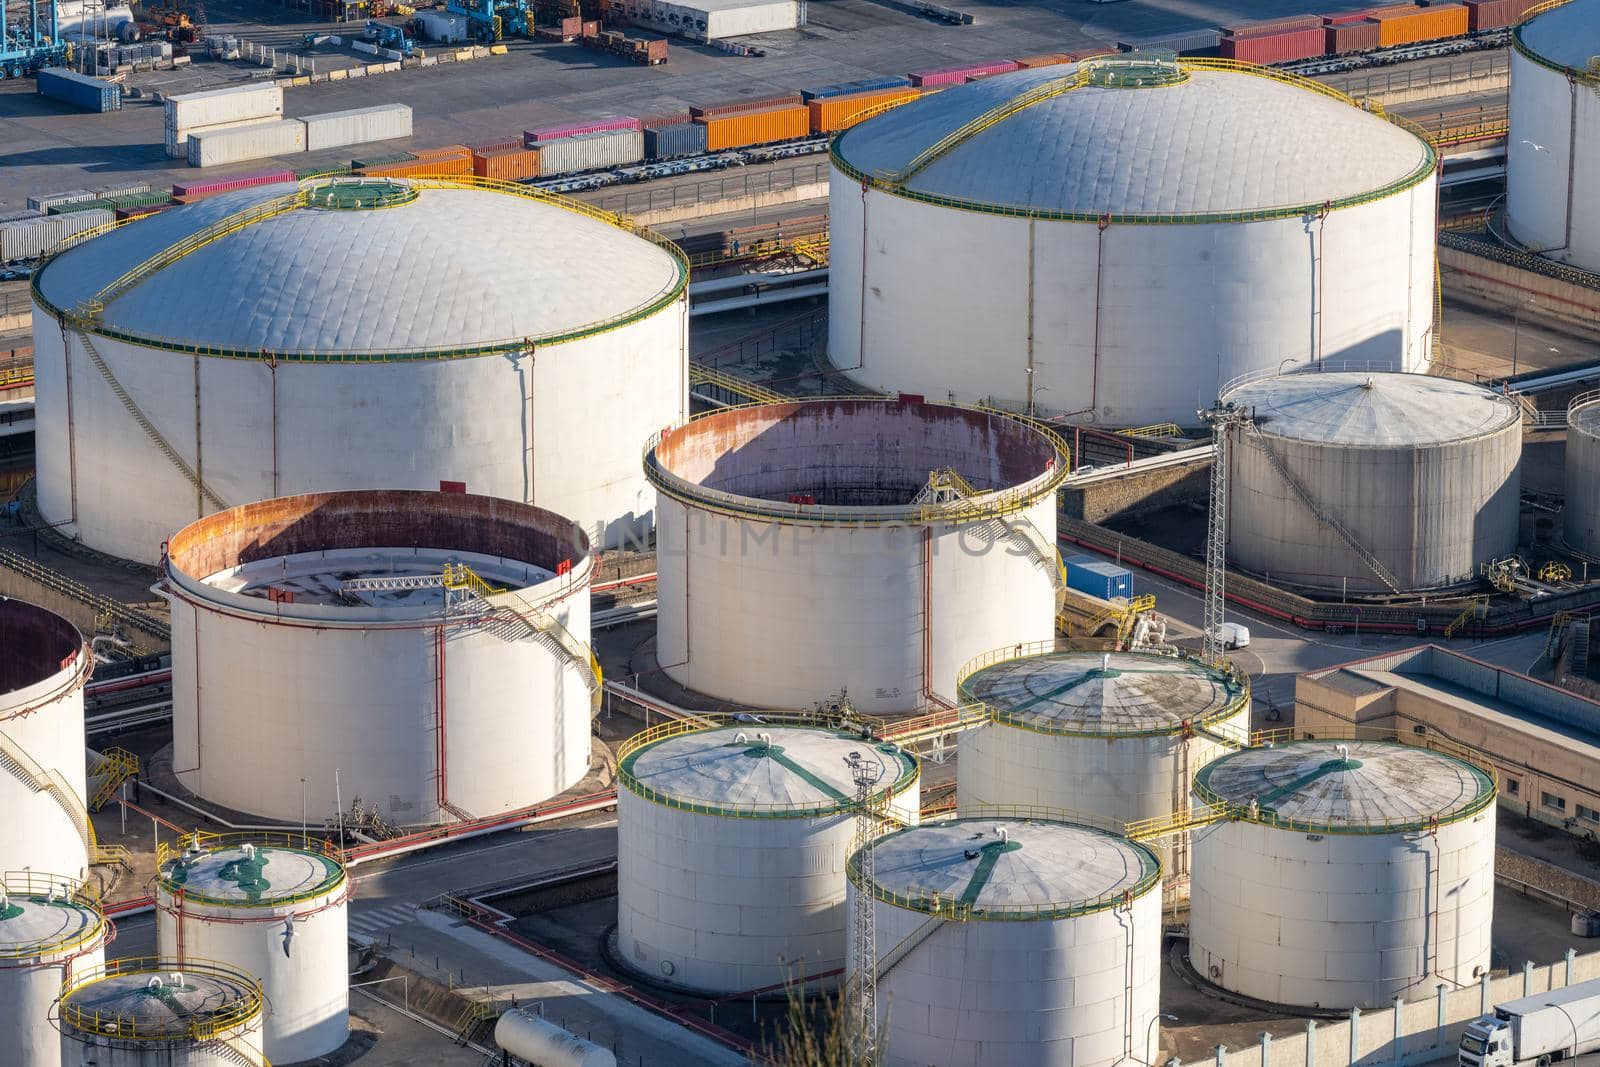 Storage tanks for crude oil seen in the commercial port of Barcelona